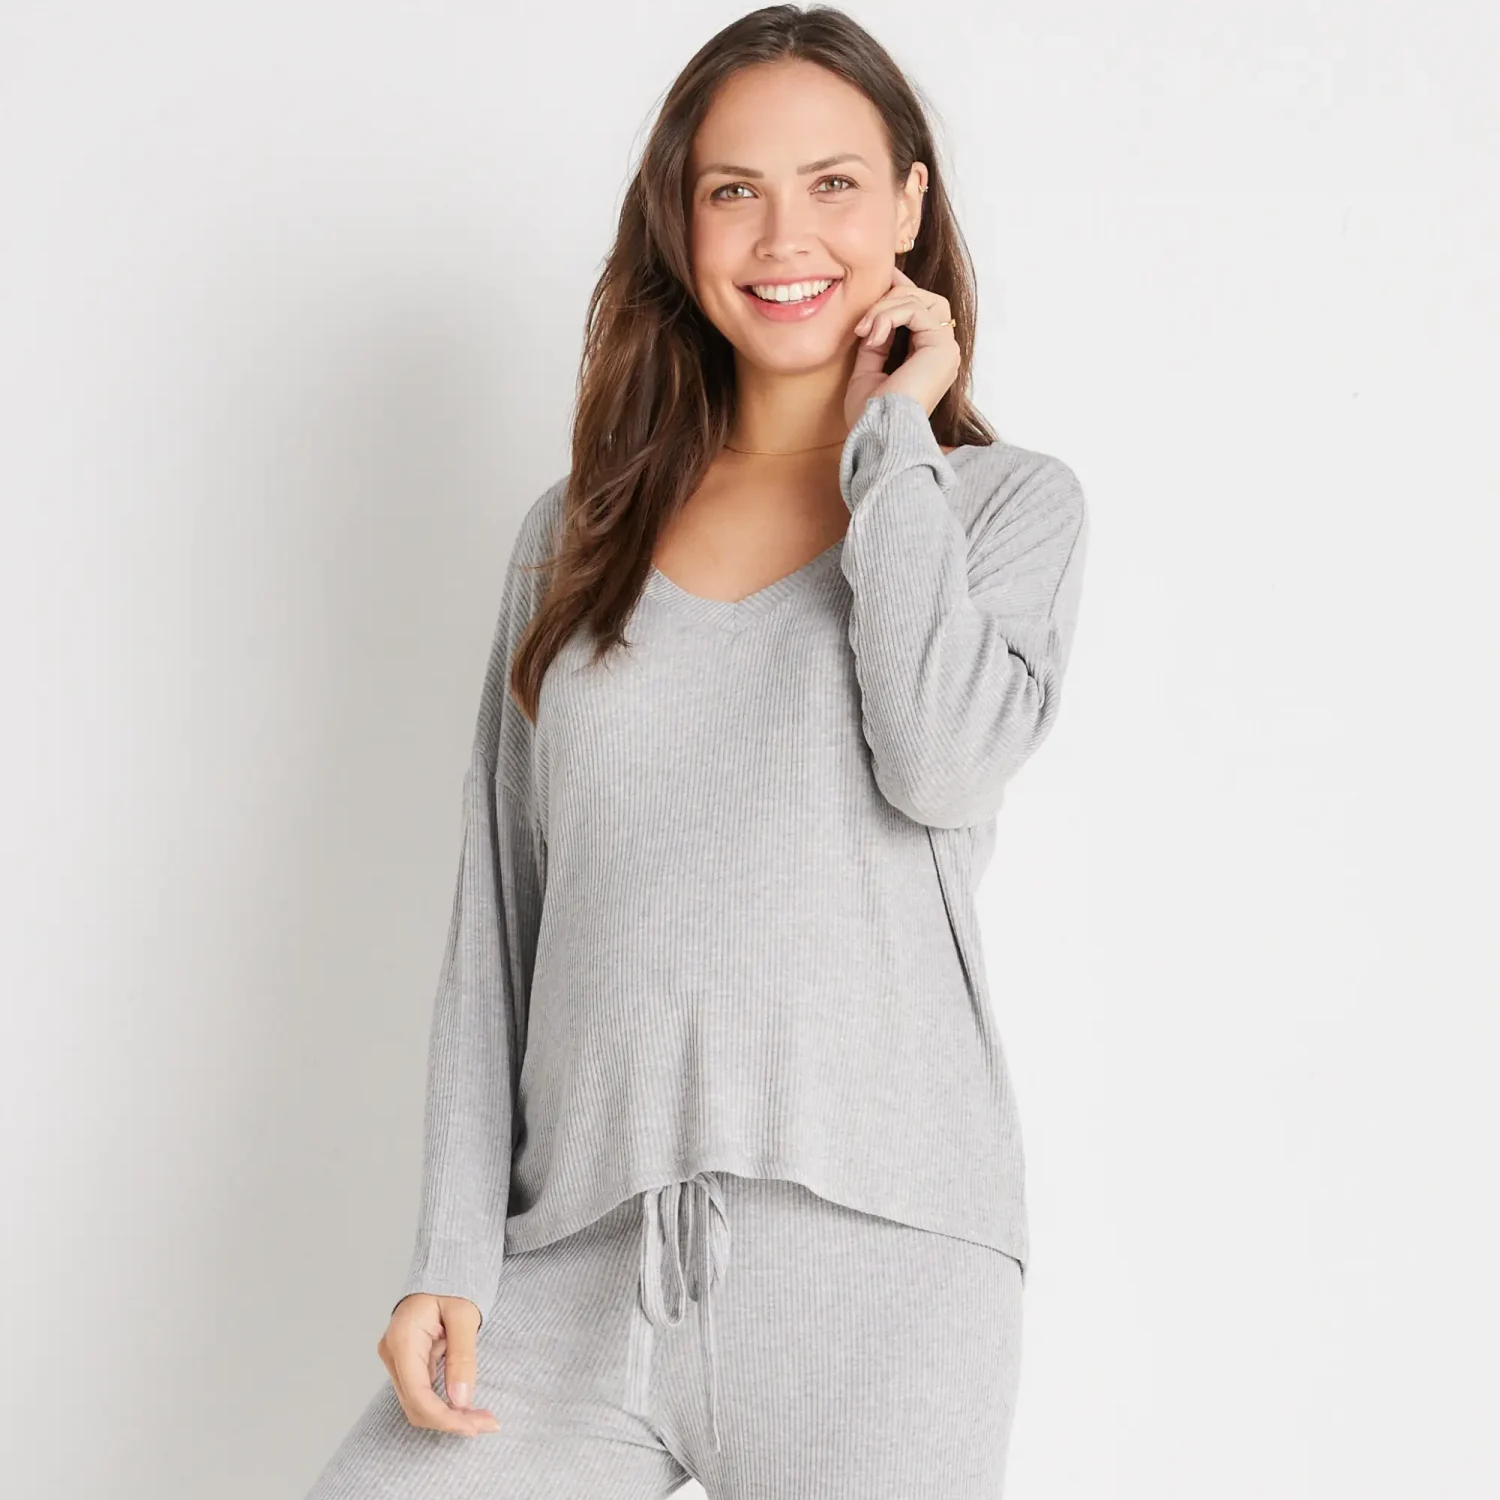 Eberjey brand contemporary and stylish maternity friendly loungewear soft pullover tops